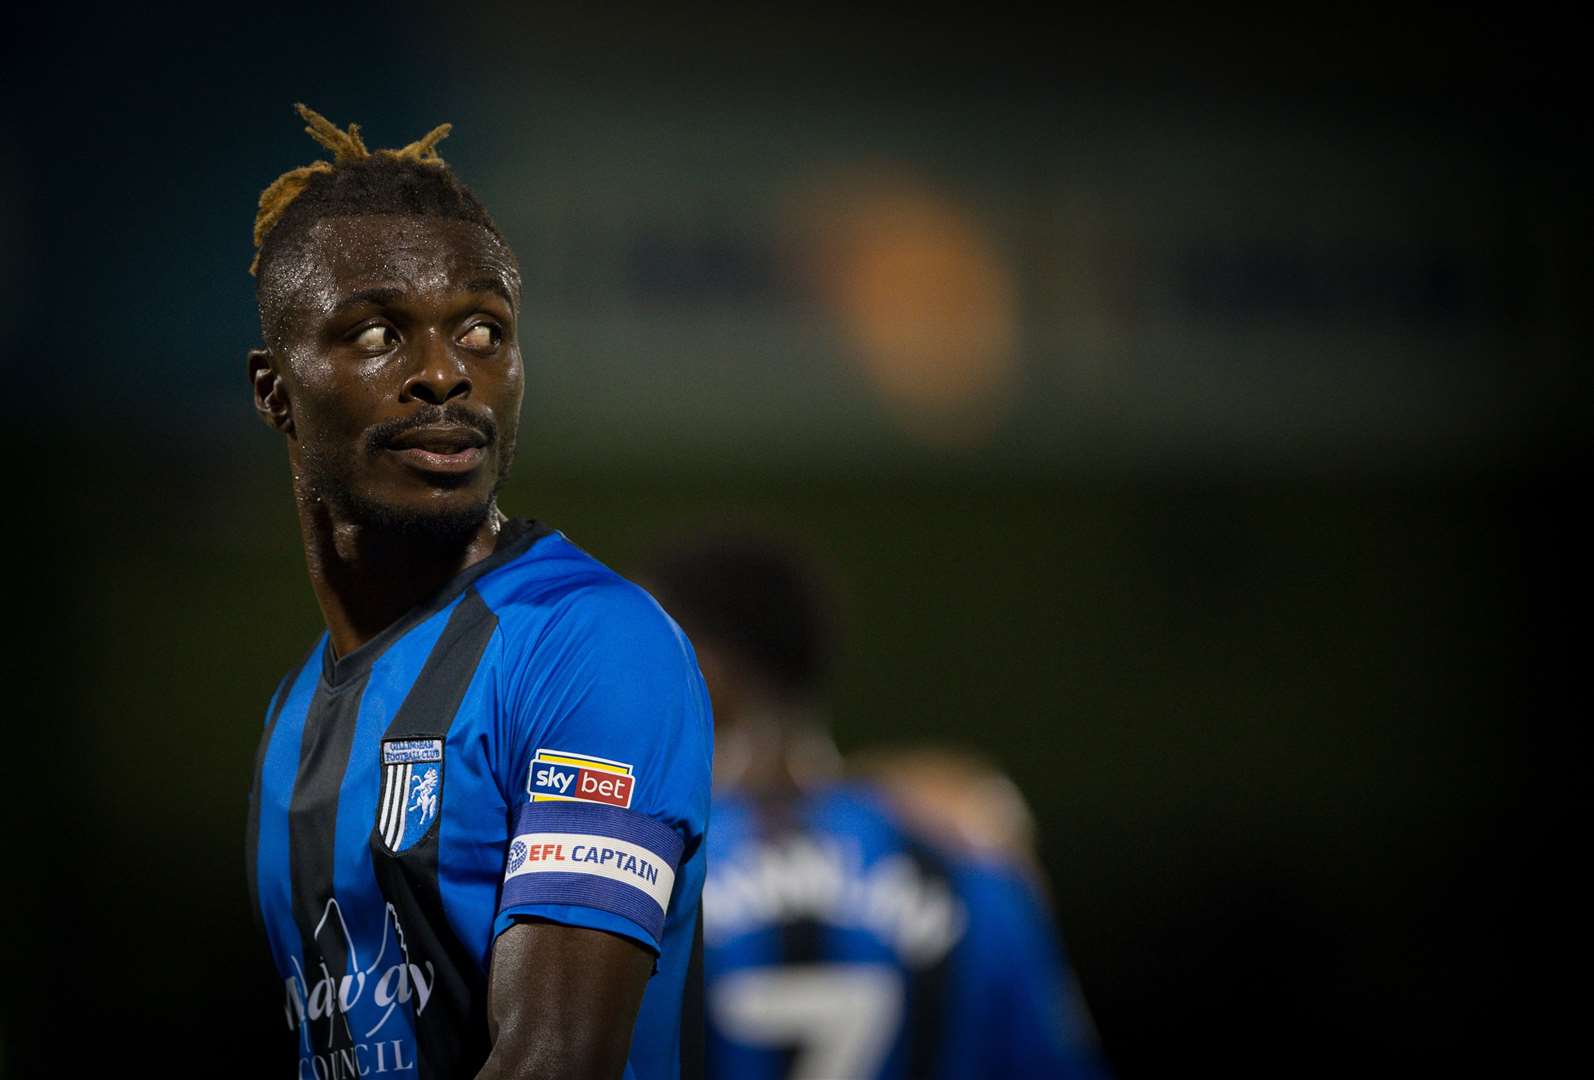 Gabriel Zakuani played 76 games for Gillingham and captained the side after joining in 2017